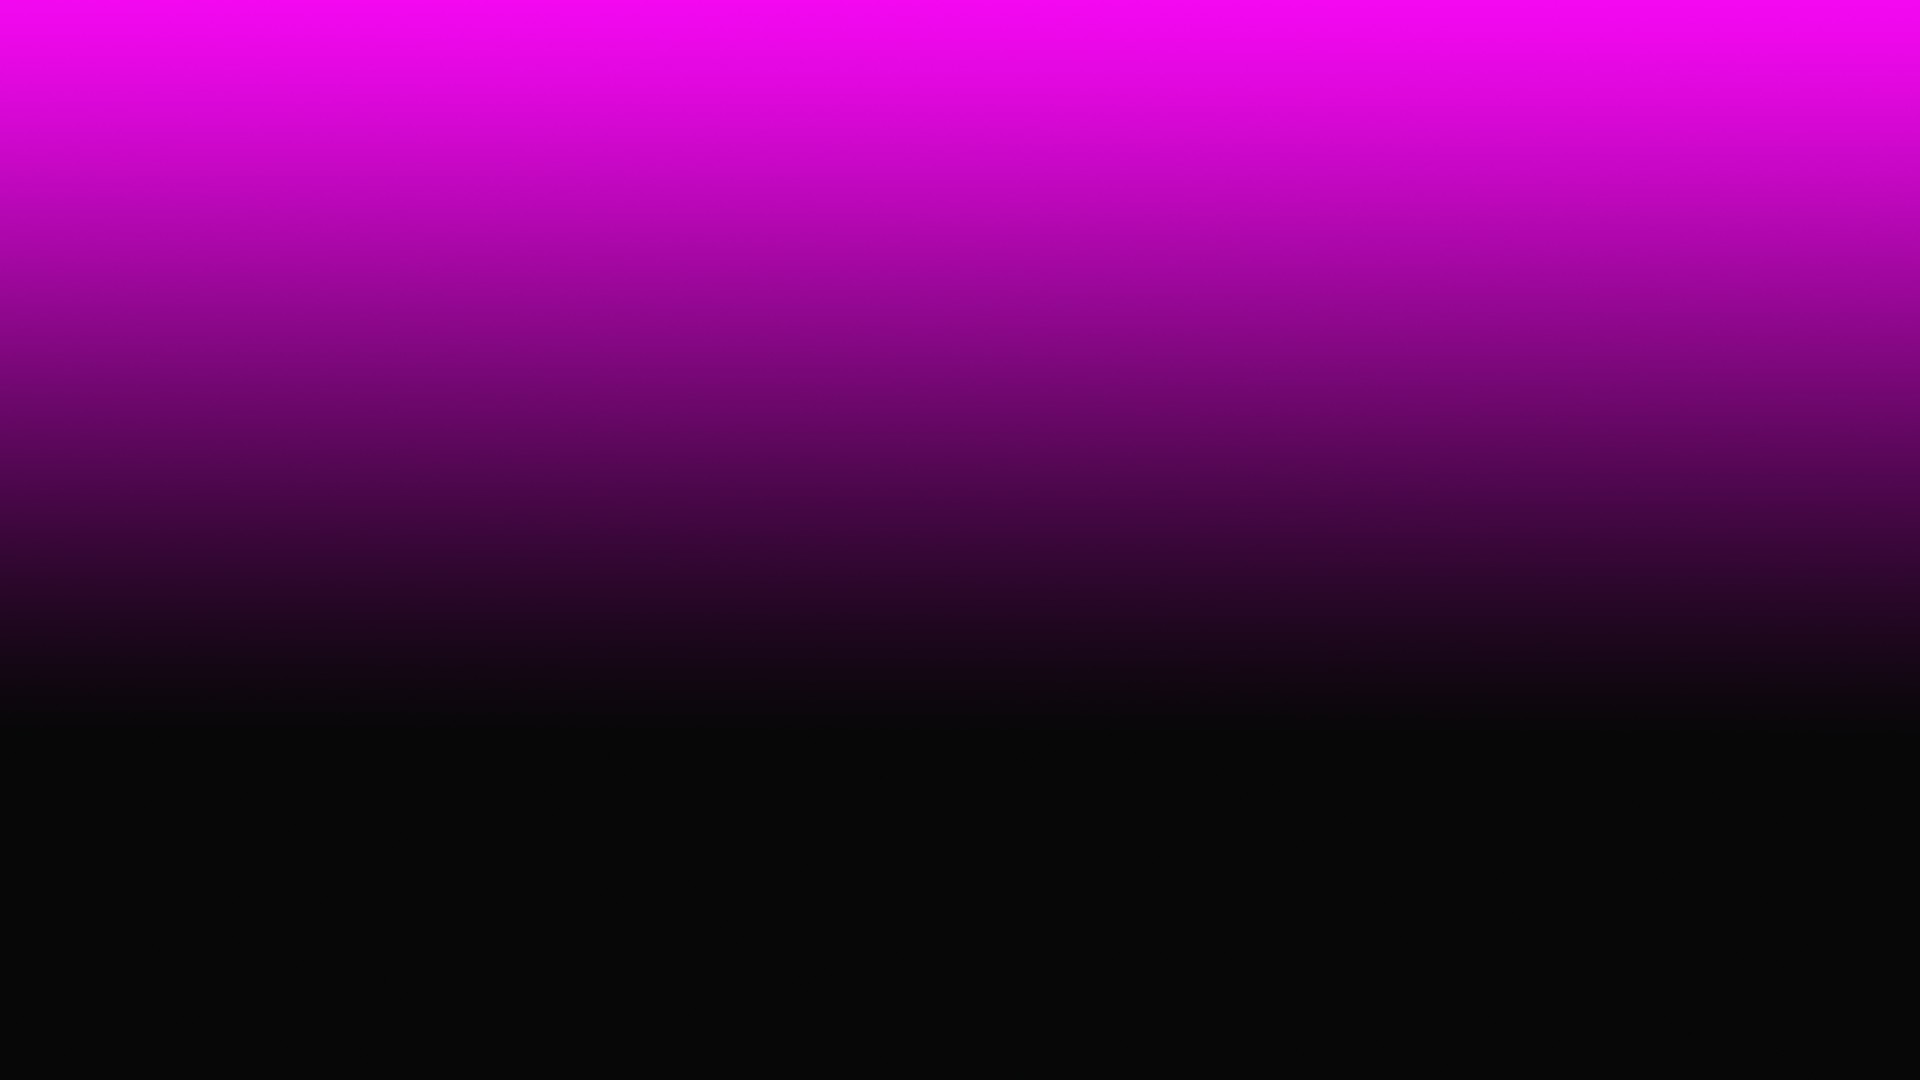 Pink And Black Background ① Download Free Beautiful Hd Backgrounds